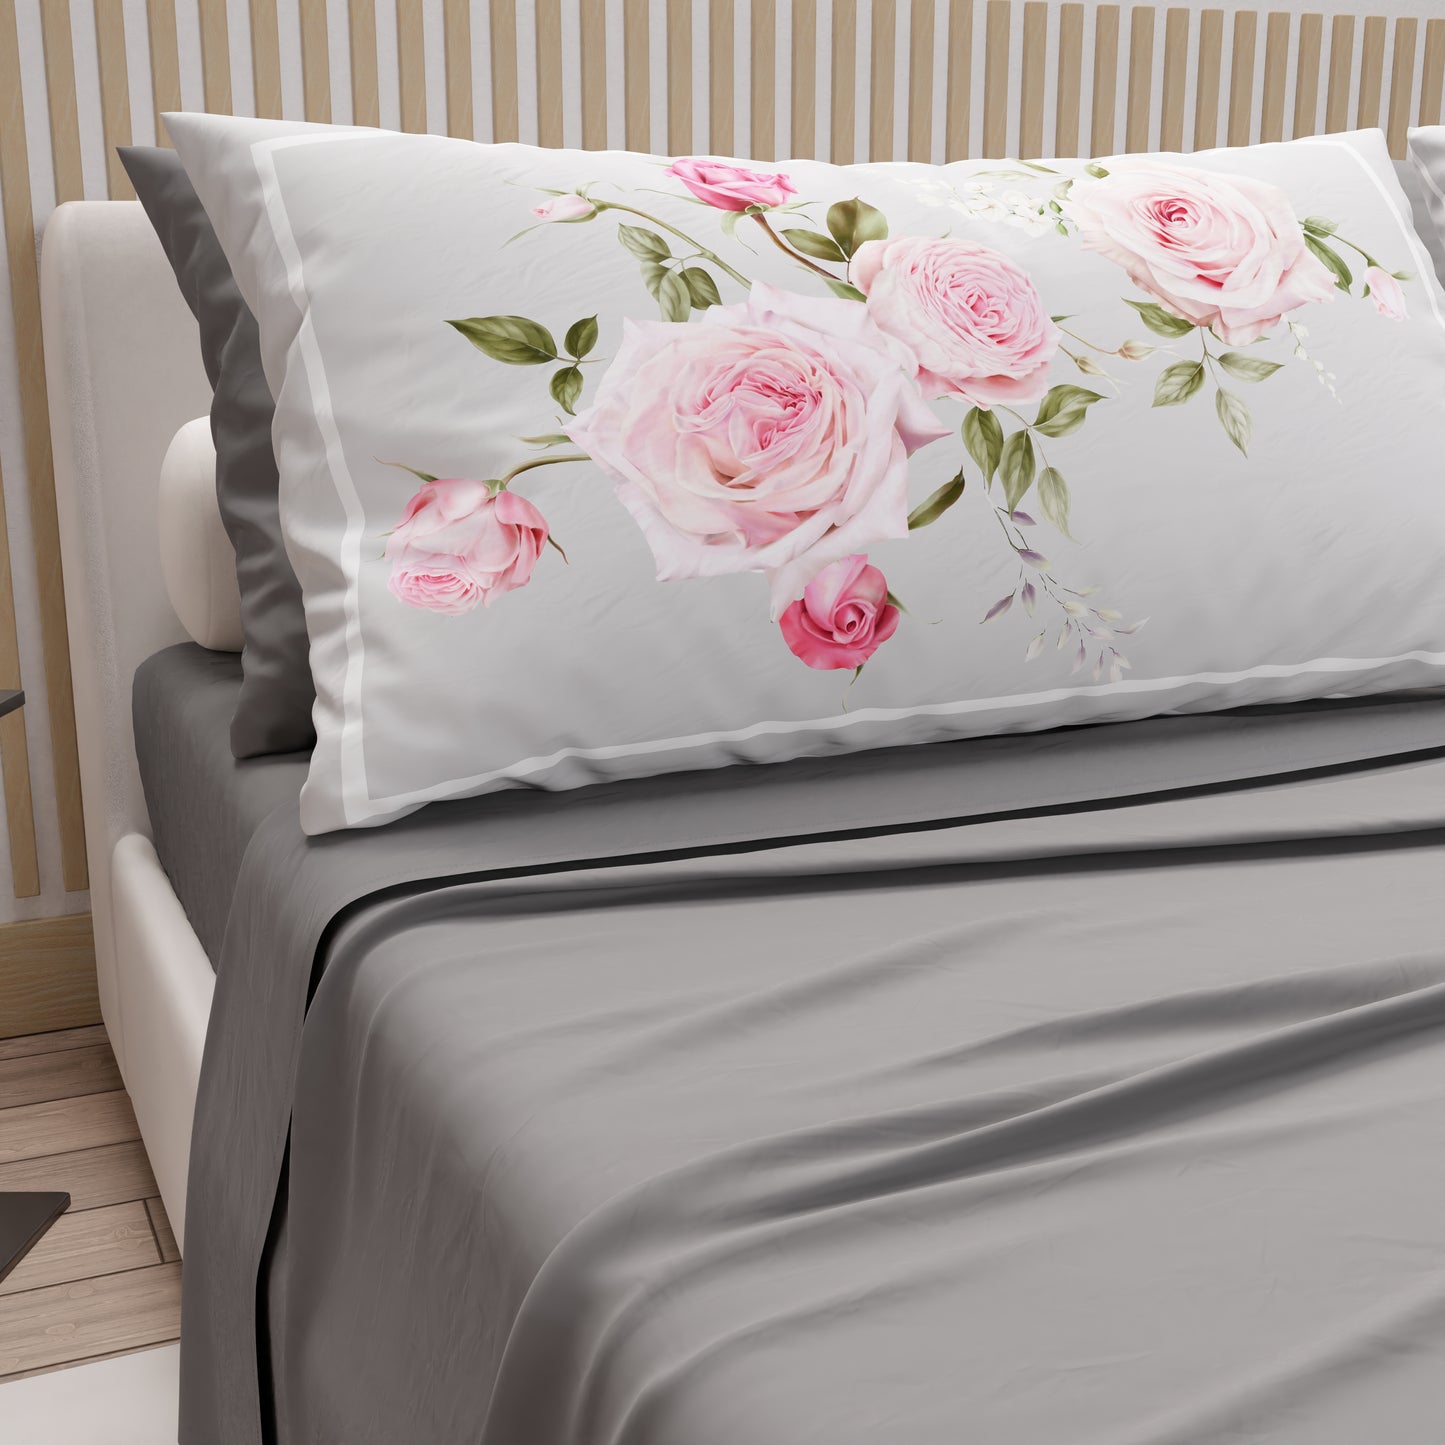 Cotton Sheets, Bed Set with Floral Digital Print Pillowcases 20-02